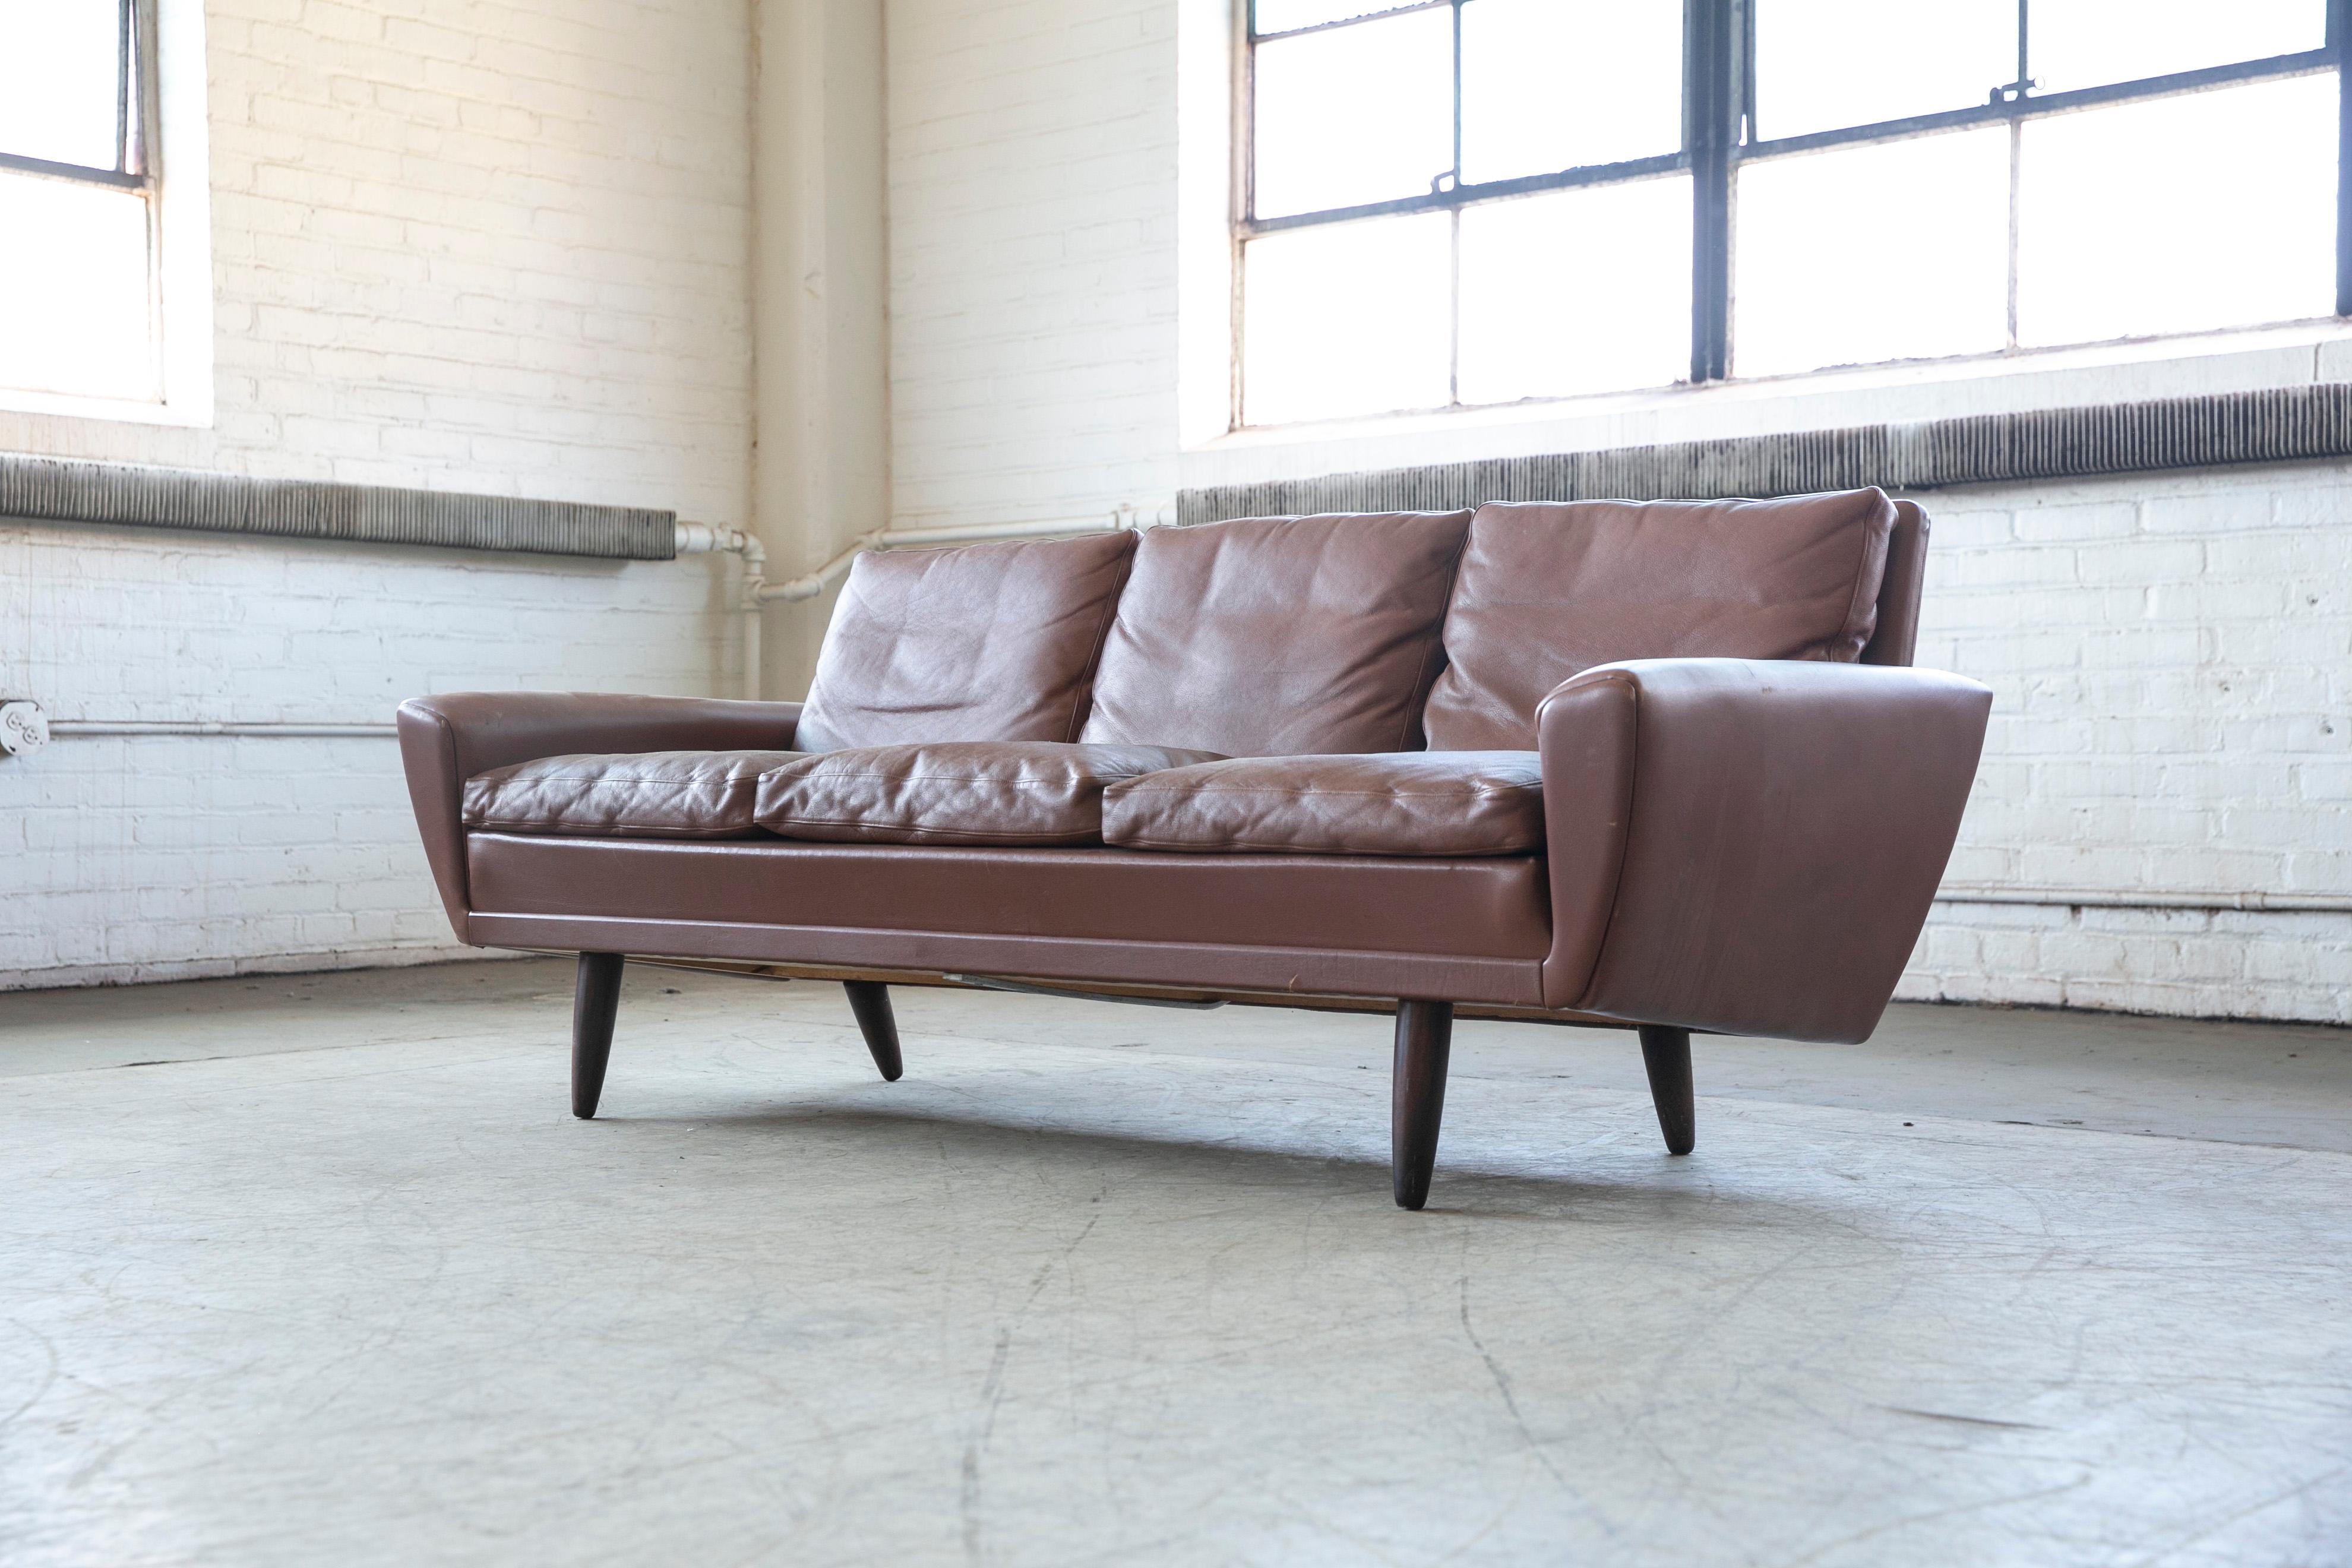 Danish Mid-Century Sofa in Cappuccino Colored Leather by Kurt Ostervig 2